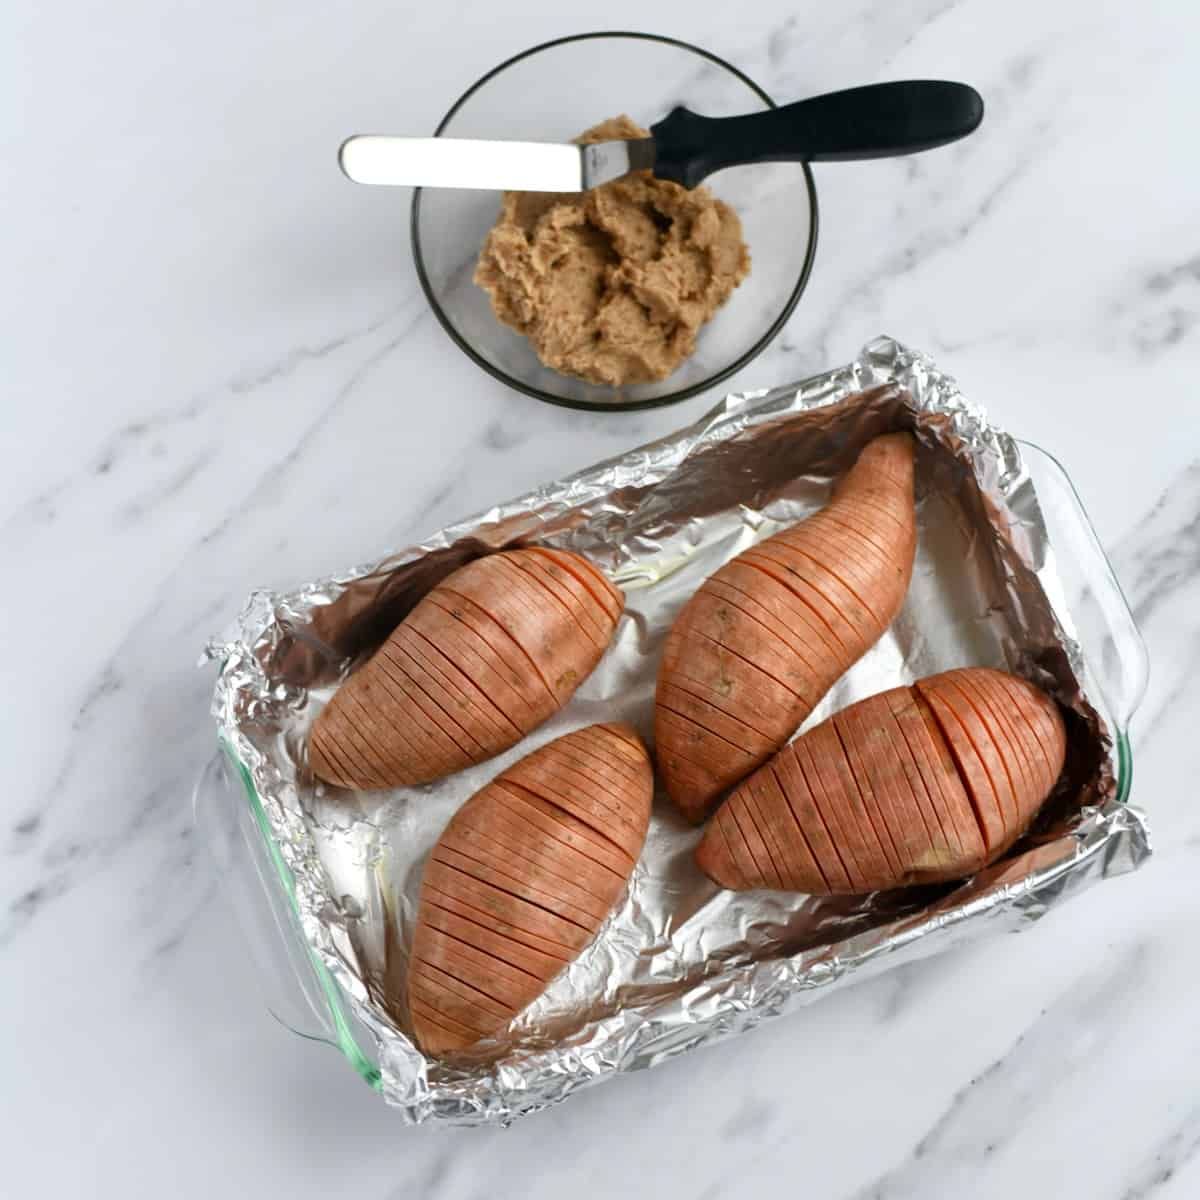 Aluminum foil lined dish with hasselback sweet potatoes in it. Glass bowl of maple pecan butter.